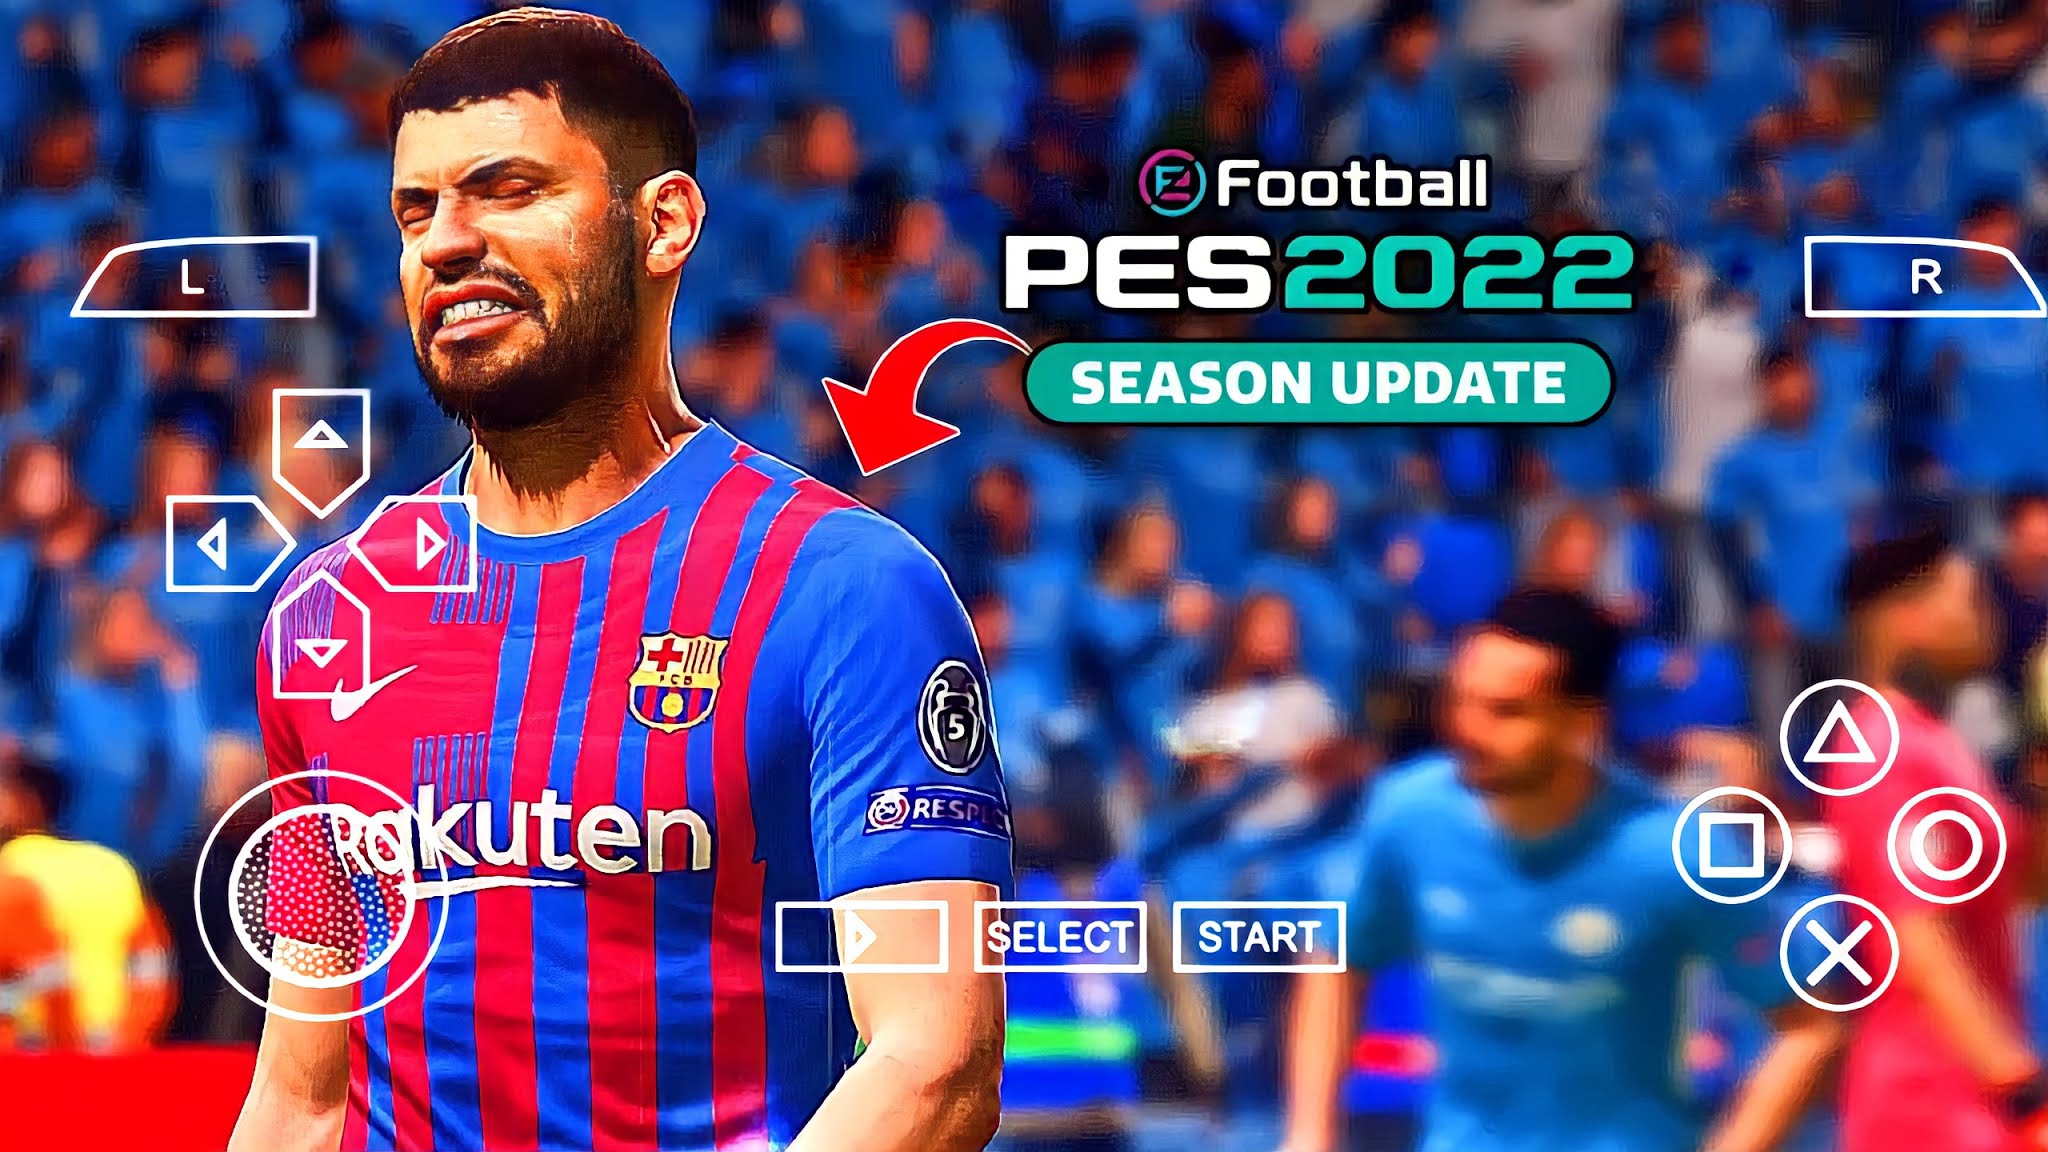 Pes Ppsspp Android Offline Best Graphics New Menu Faces Kits New Sexiezpicz Web Porn